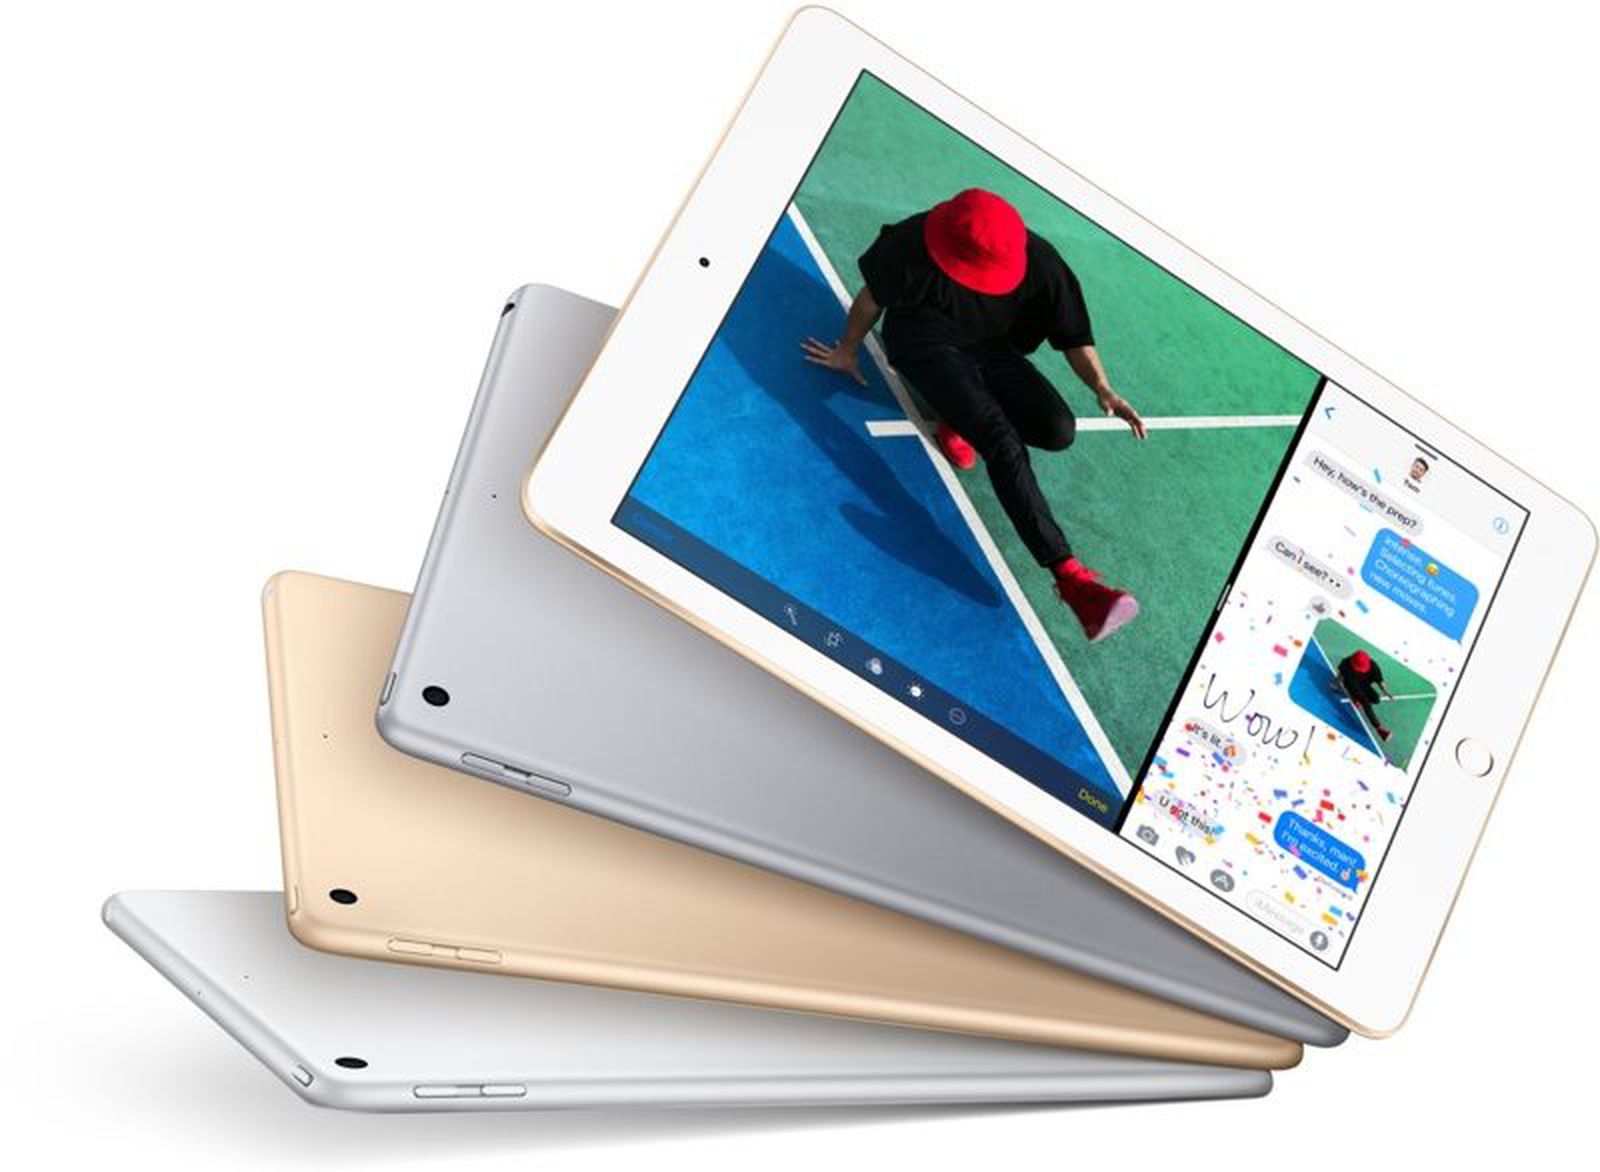 Apple's iPhone 6 Plus & fourth-generation iPad are now officially